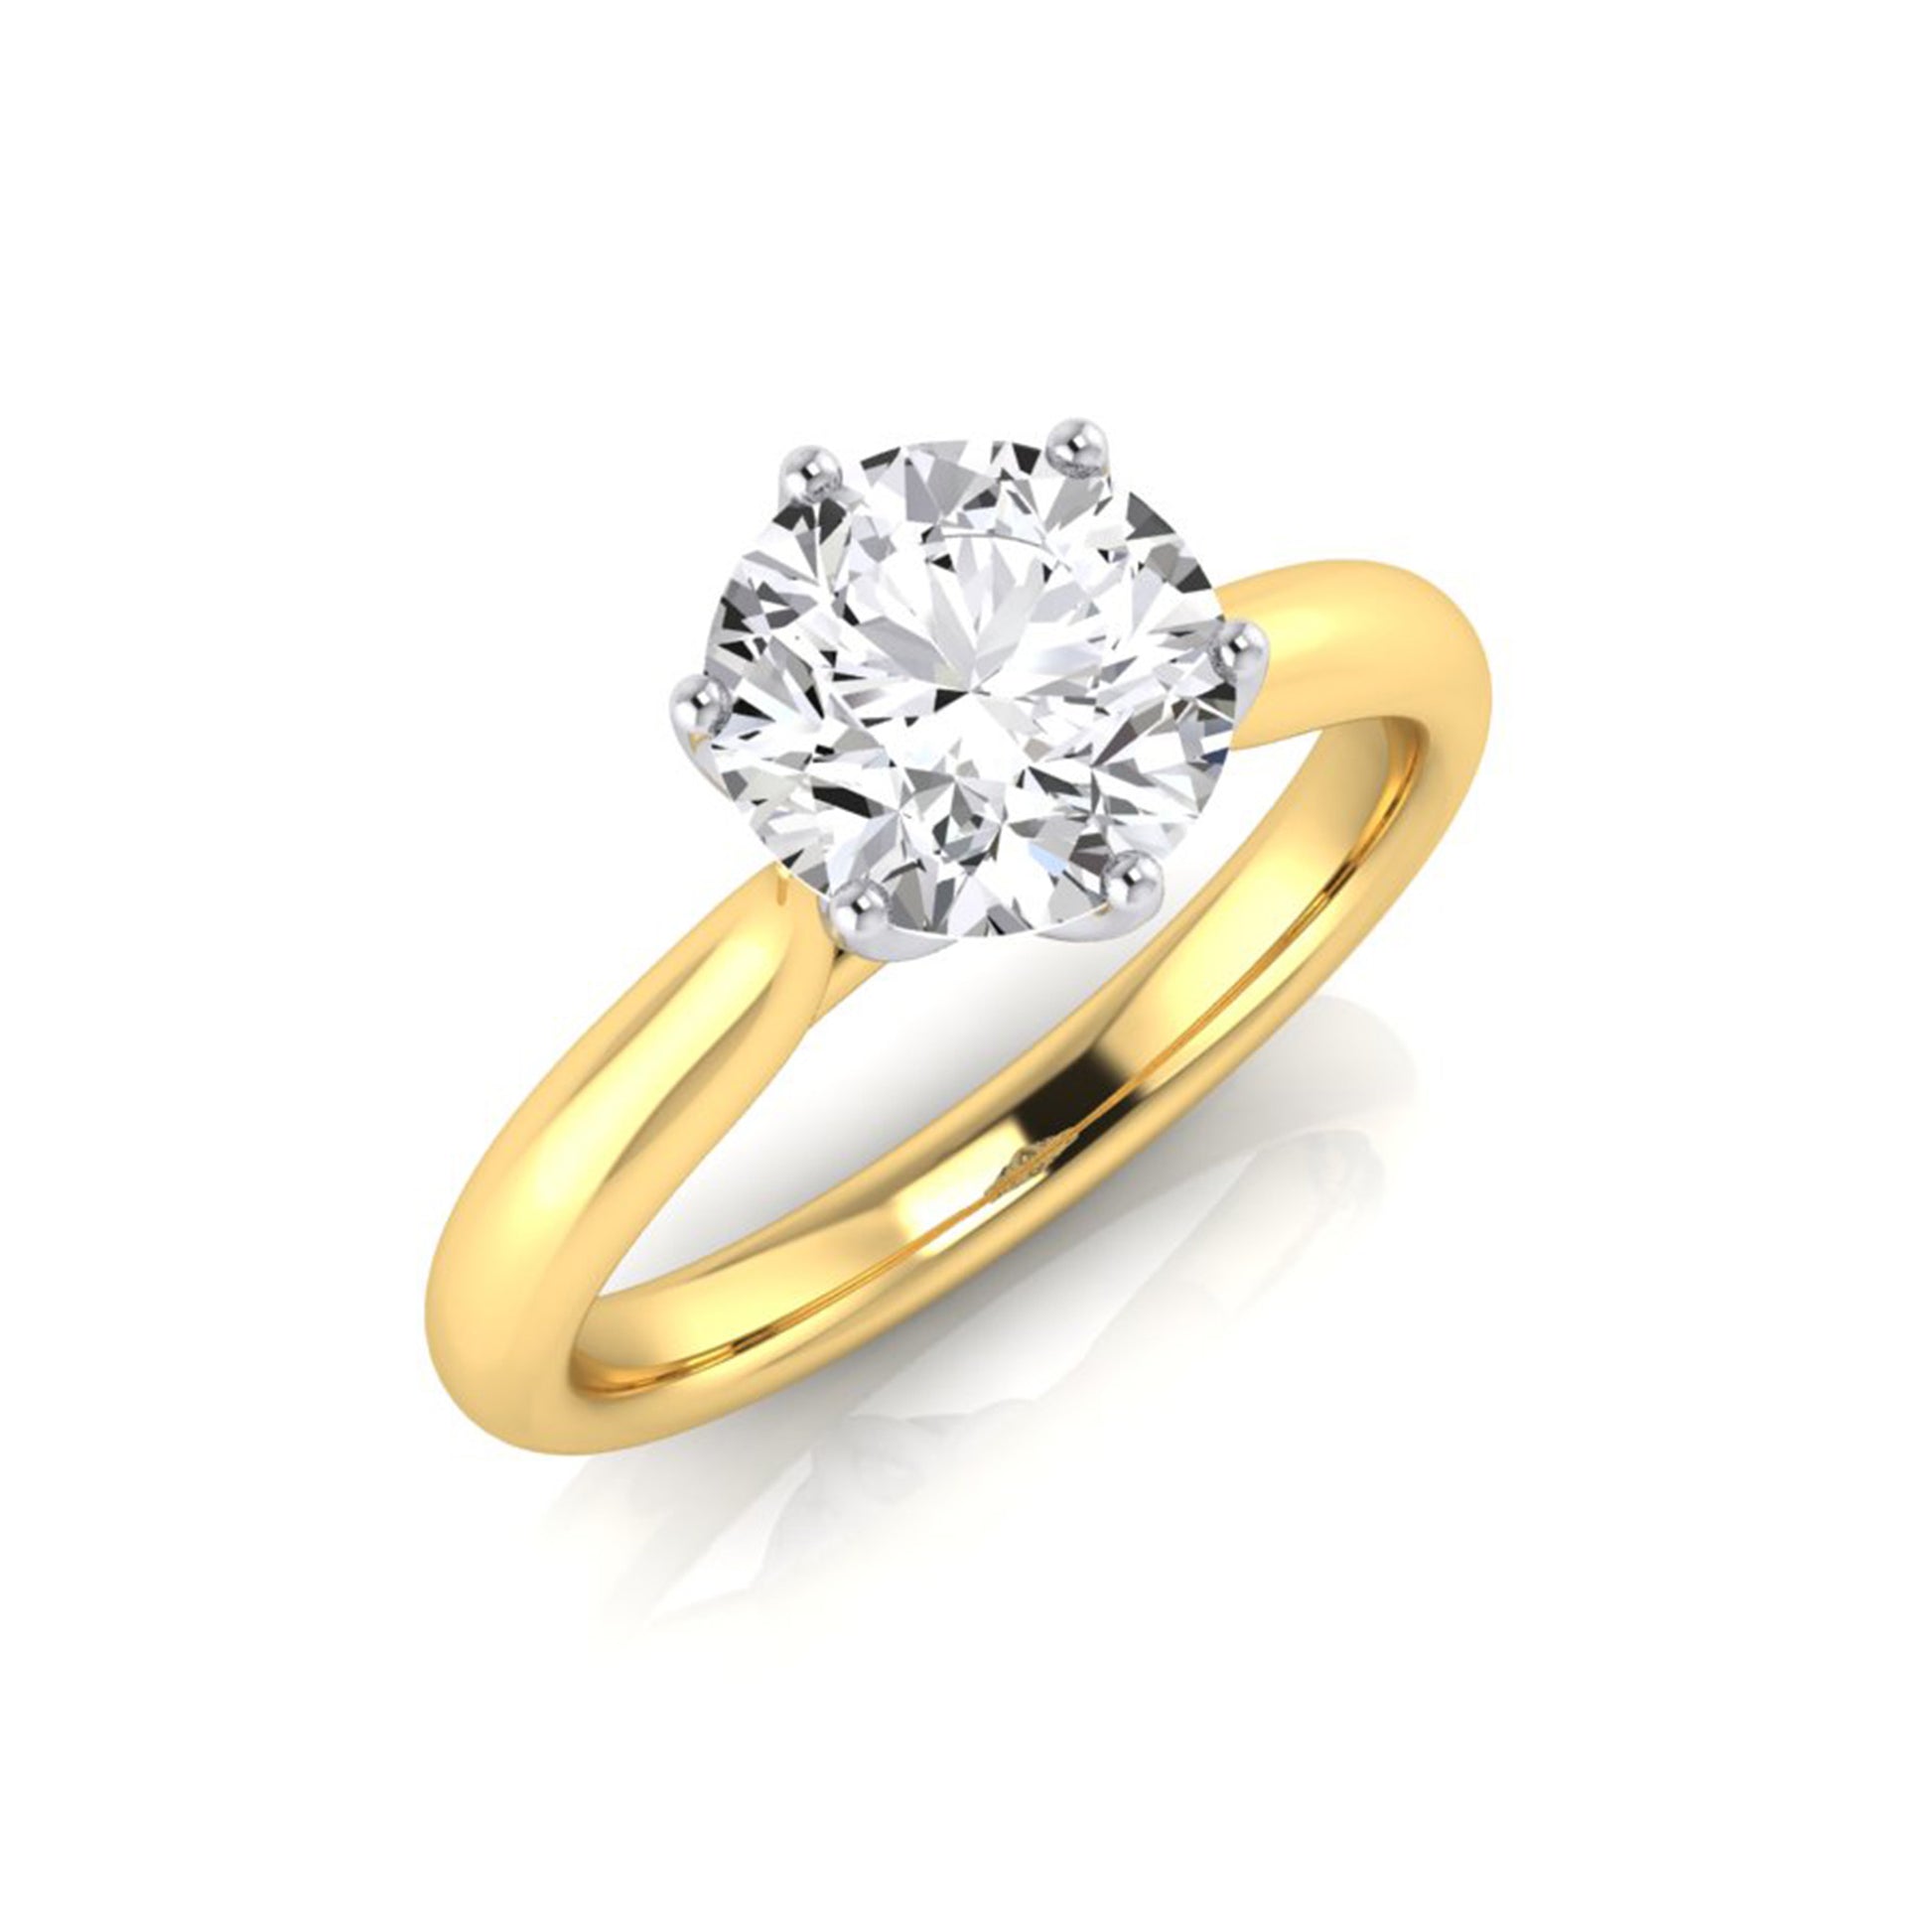 Lilly GIA Brilliant Diamond Solitaire 6 Claw Ring